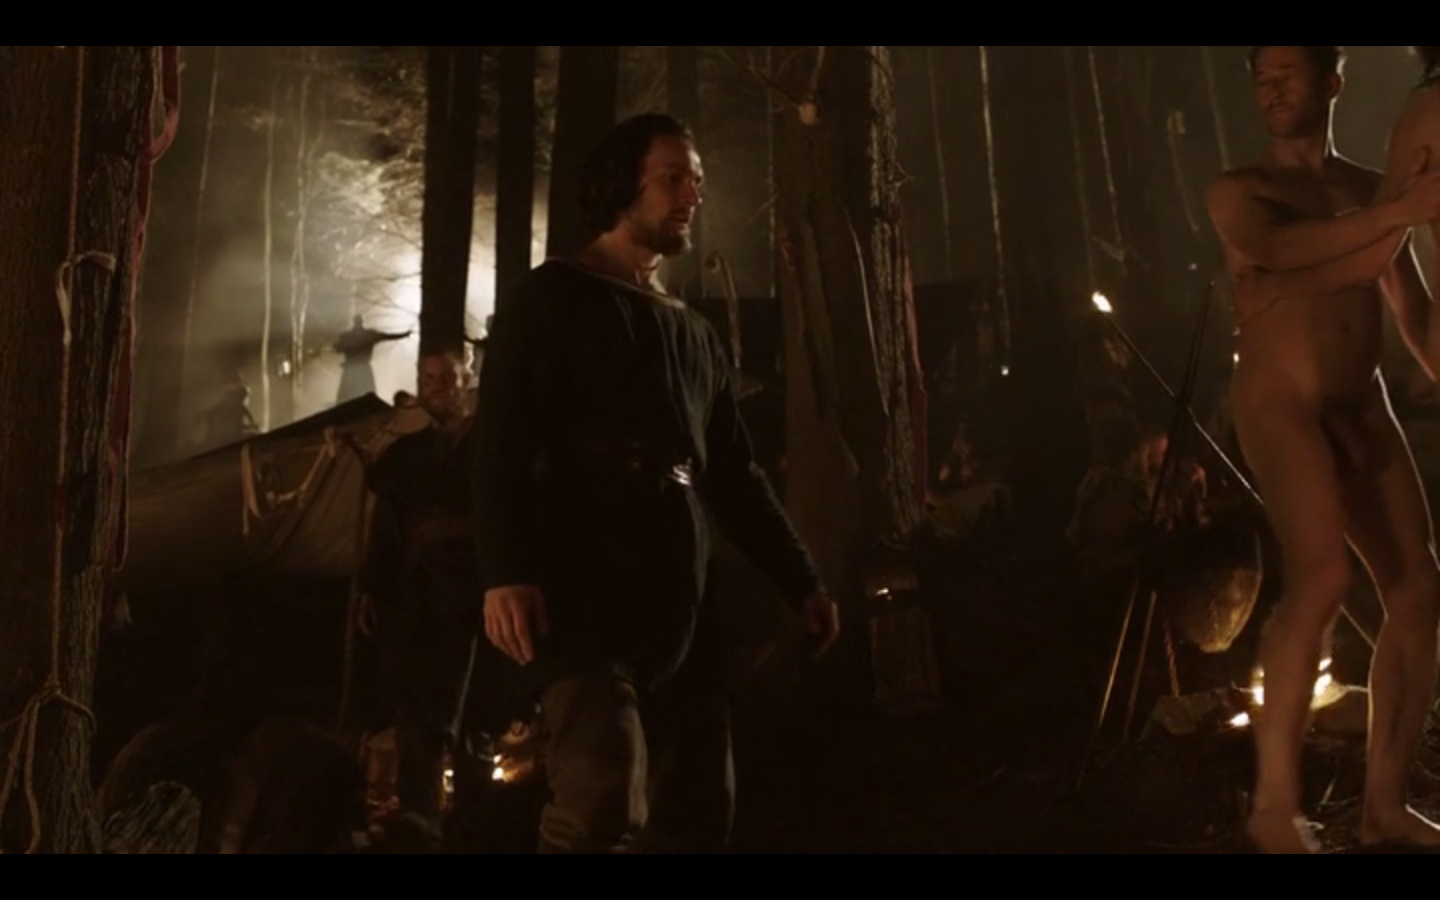 Vikings 1x08 - Clive Standen, George Blagden & Naked Extra.